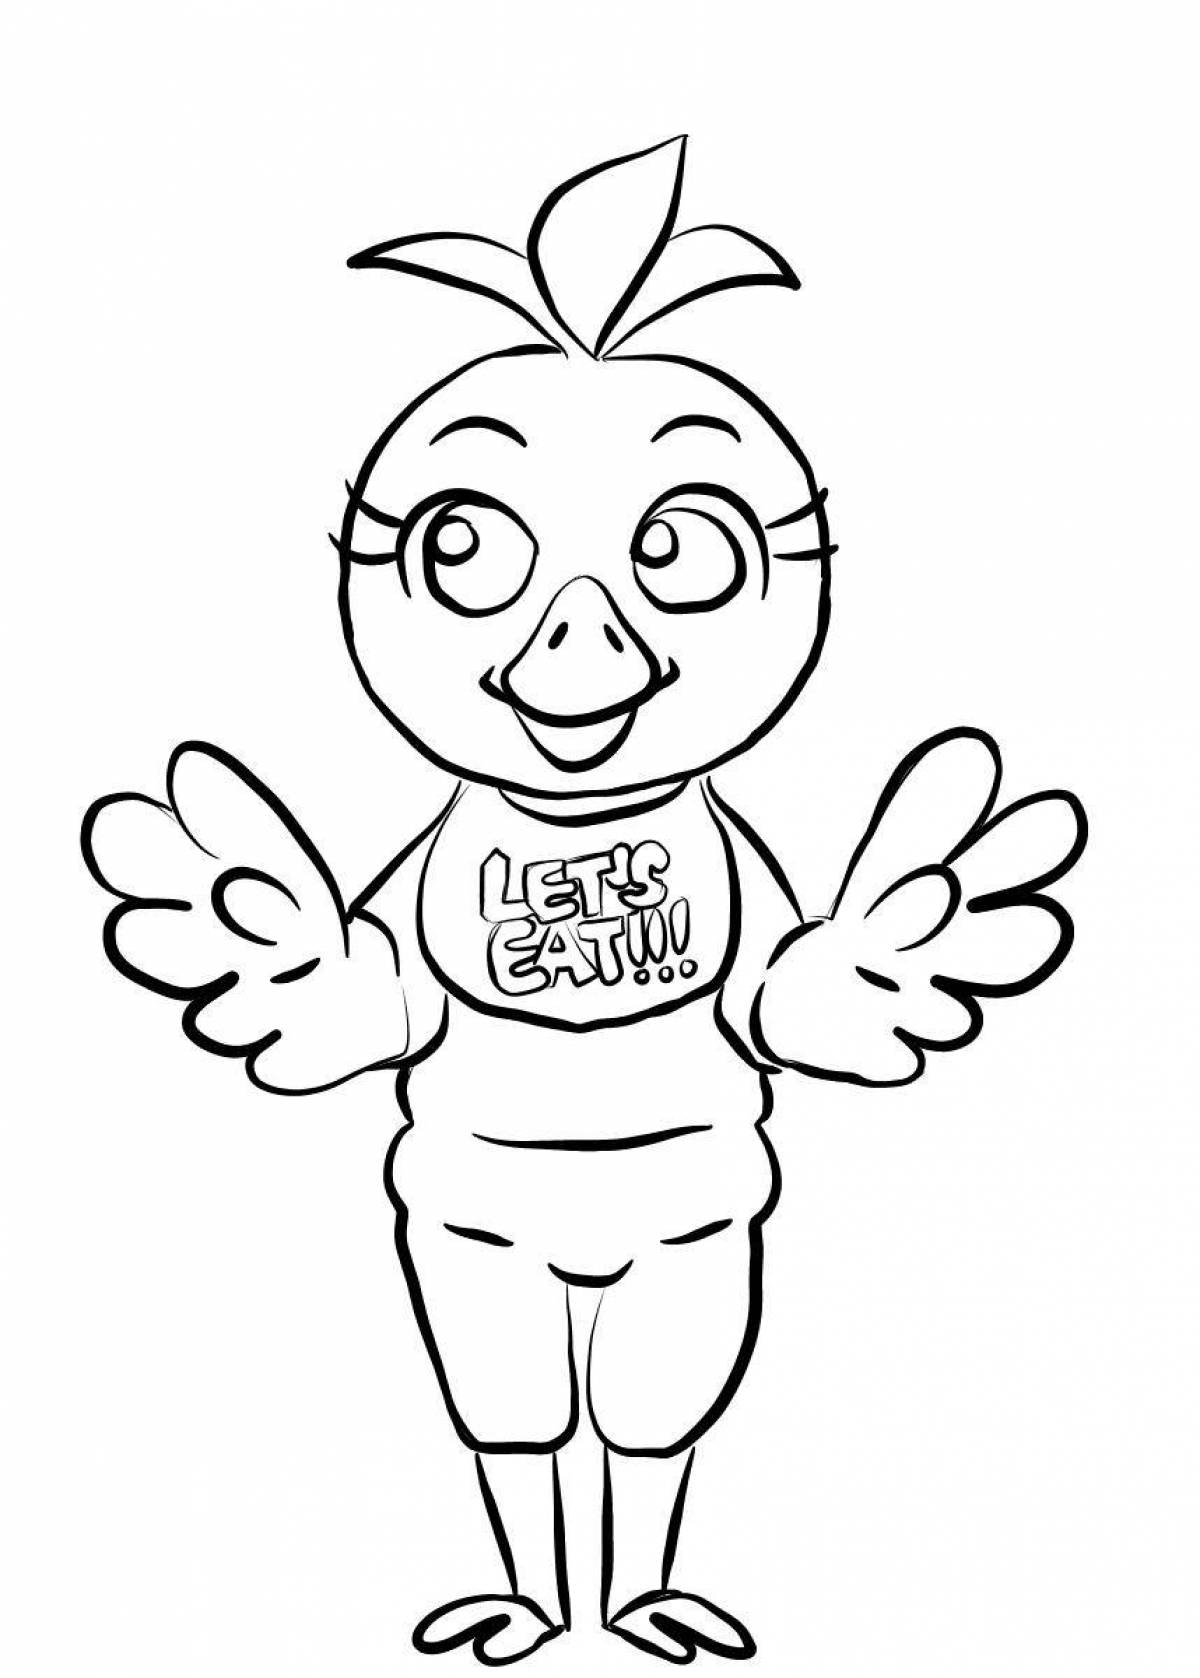 Chica's awesome animatronic coloring book